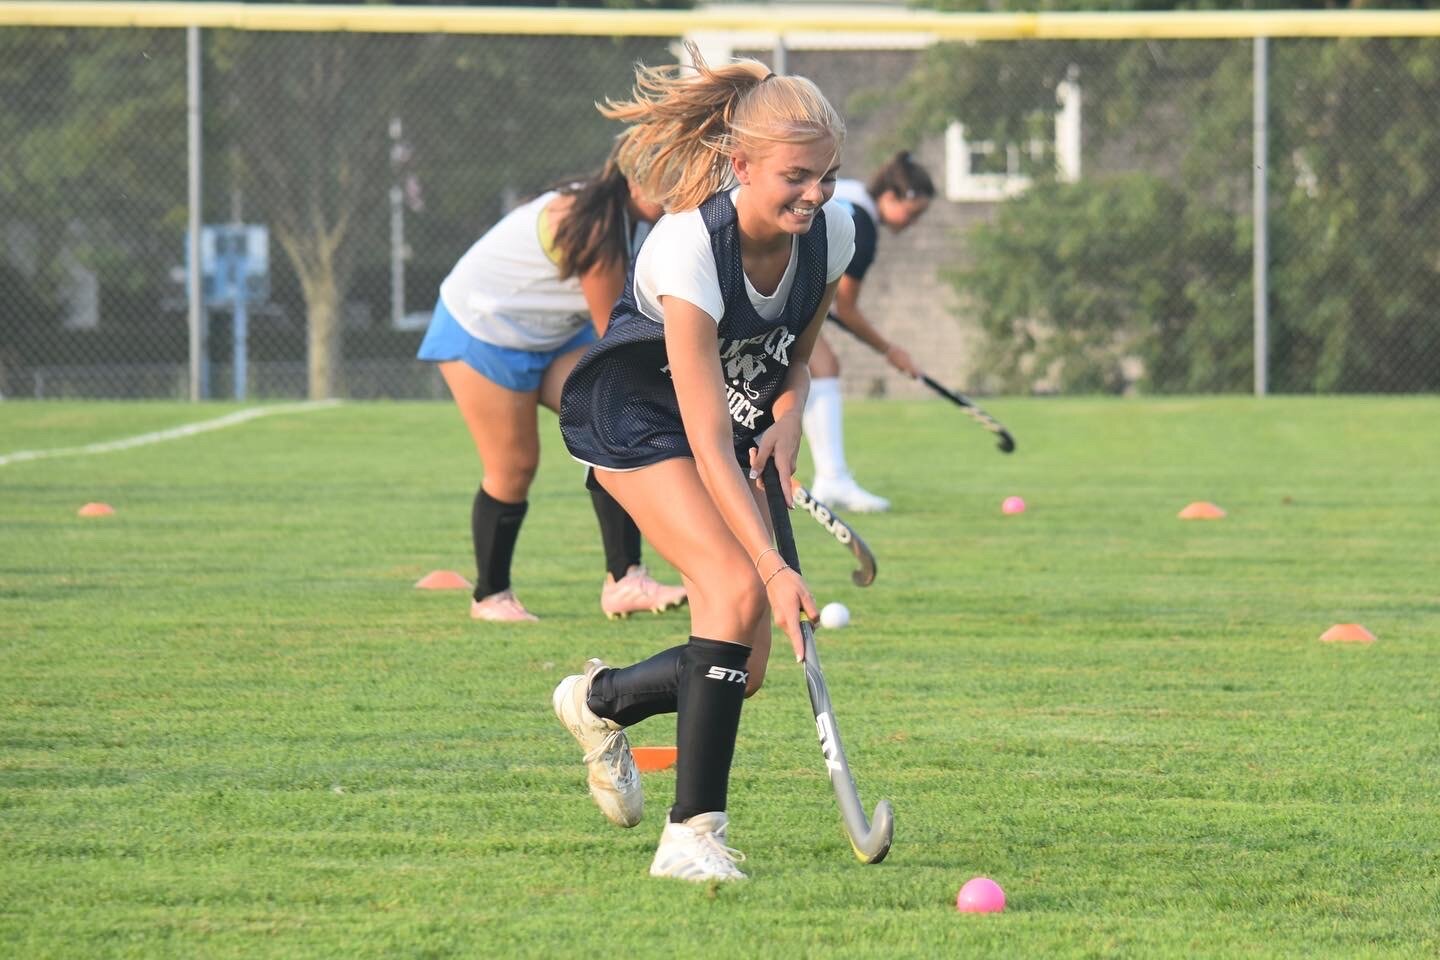 Monday marked the first full day of fall sports practices for the Whalers.